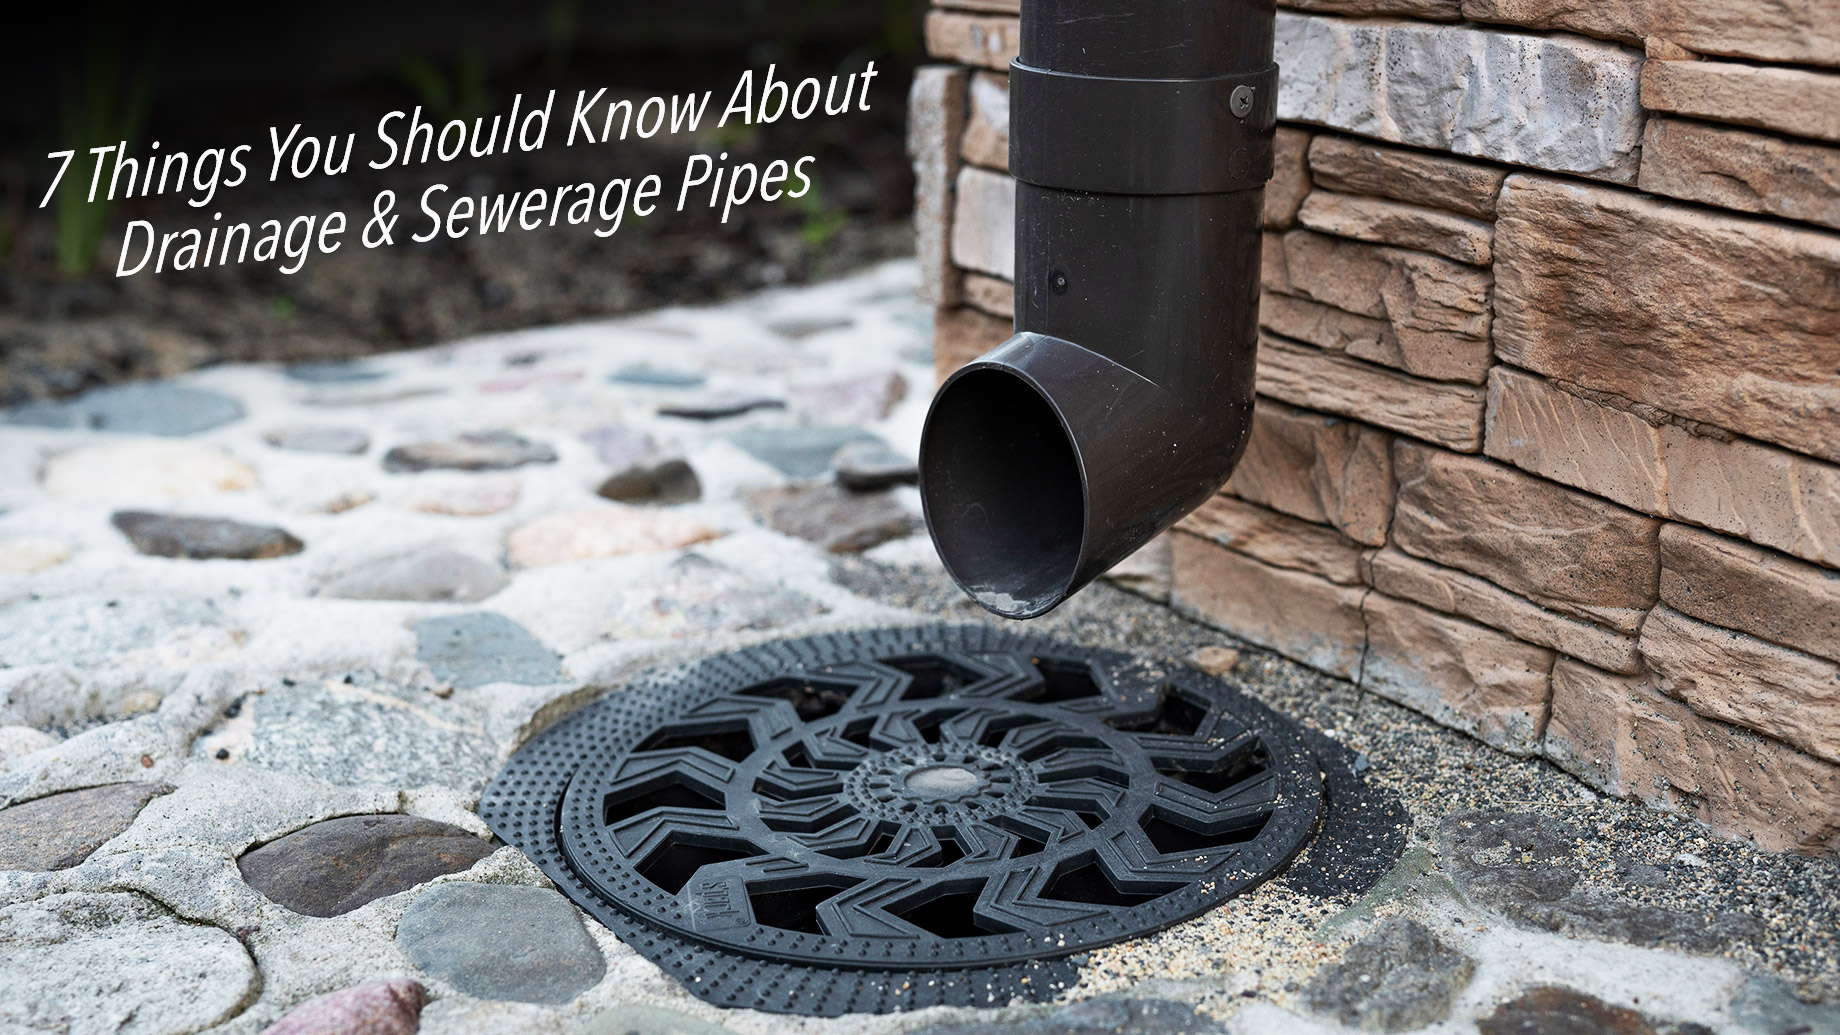 7 Things You Should Know About Drainage & Sewerage Pipes